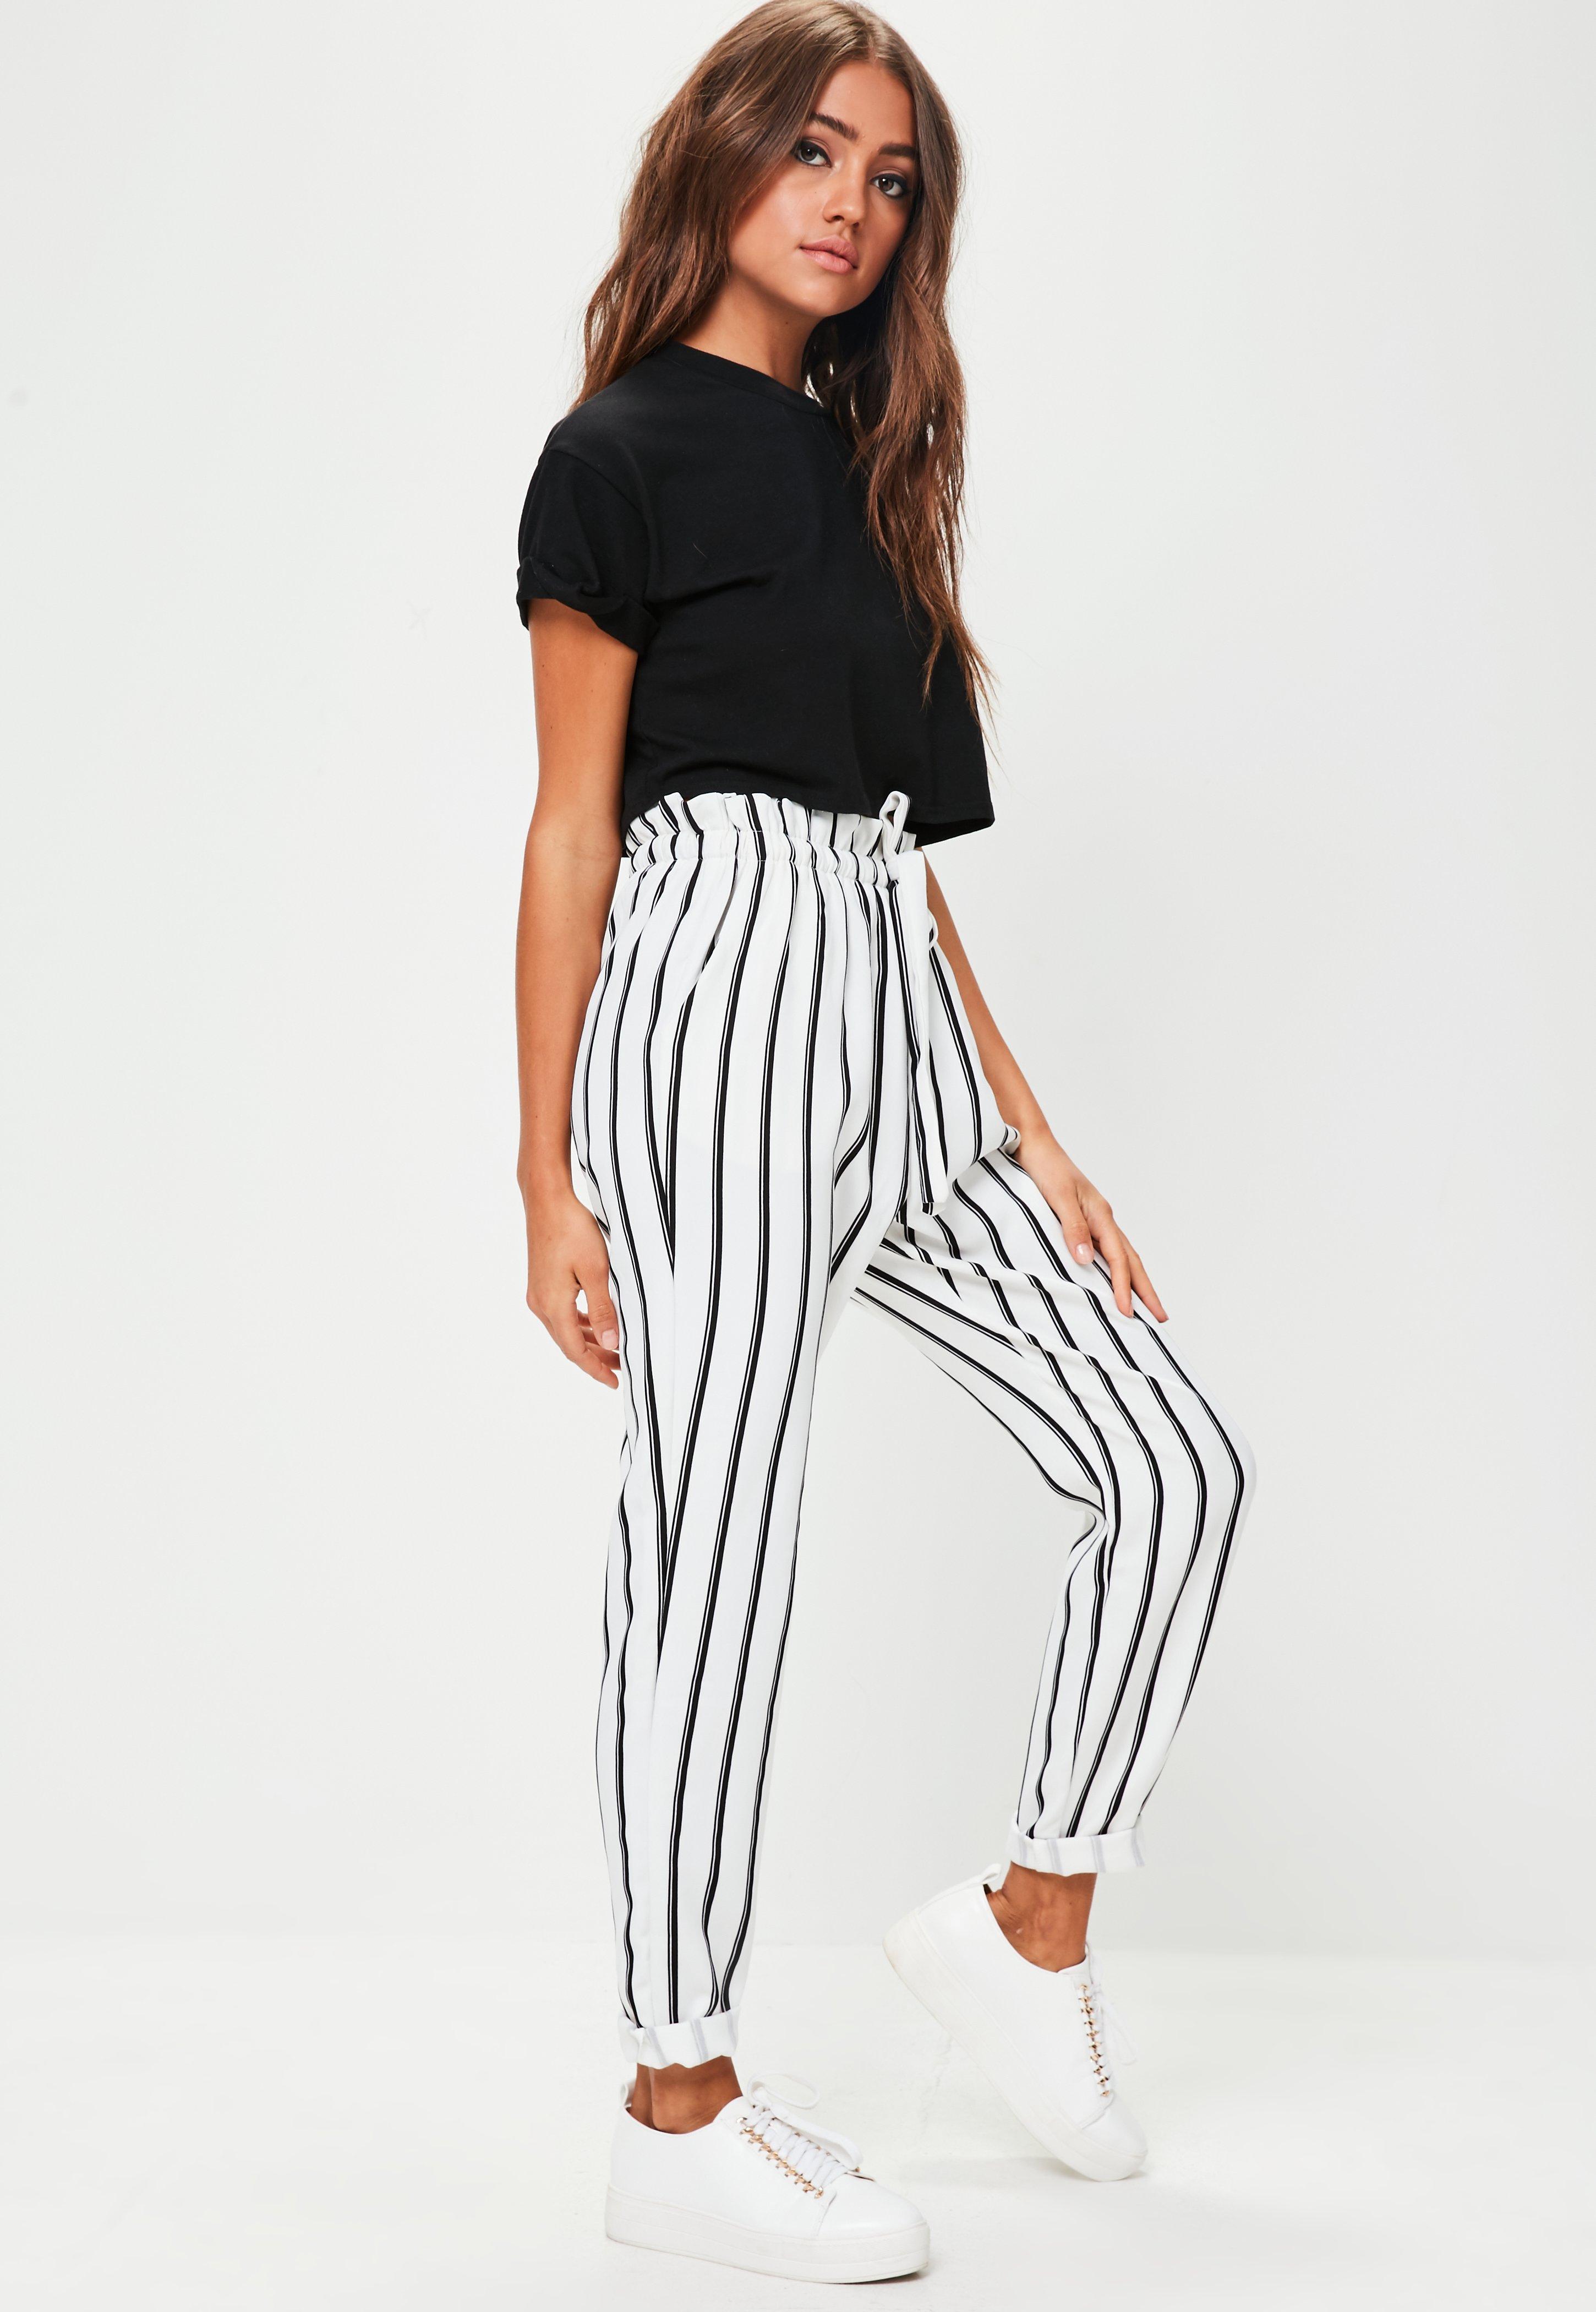 Lyst - Missguided White Striped Slim Leg Joggers in White